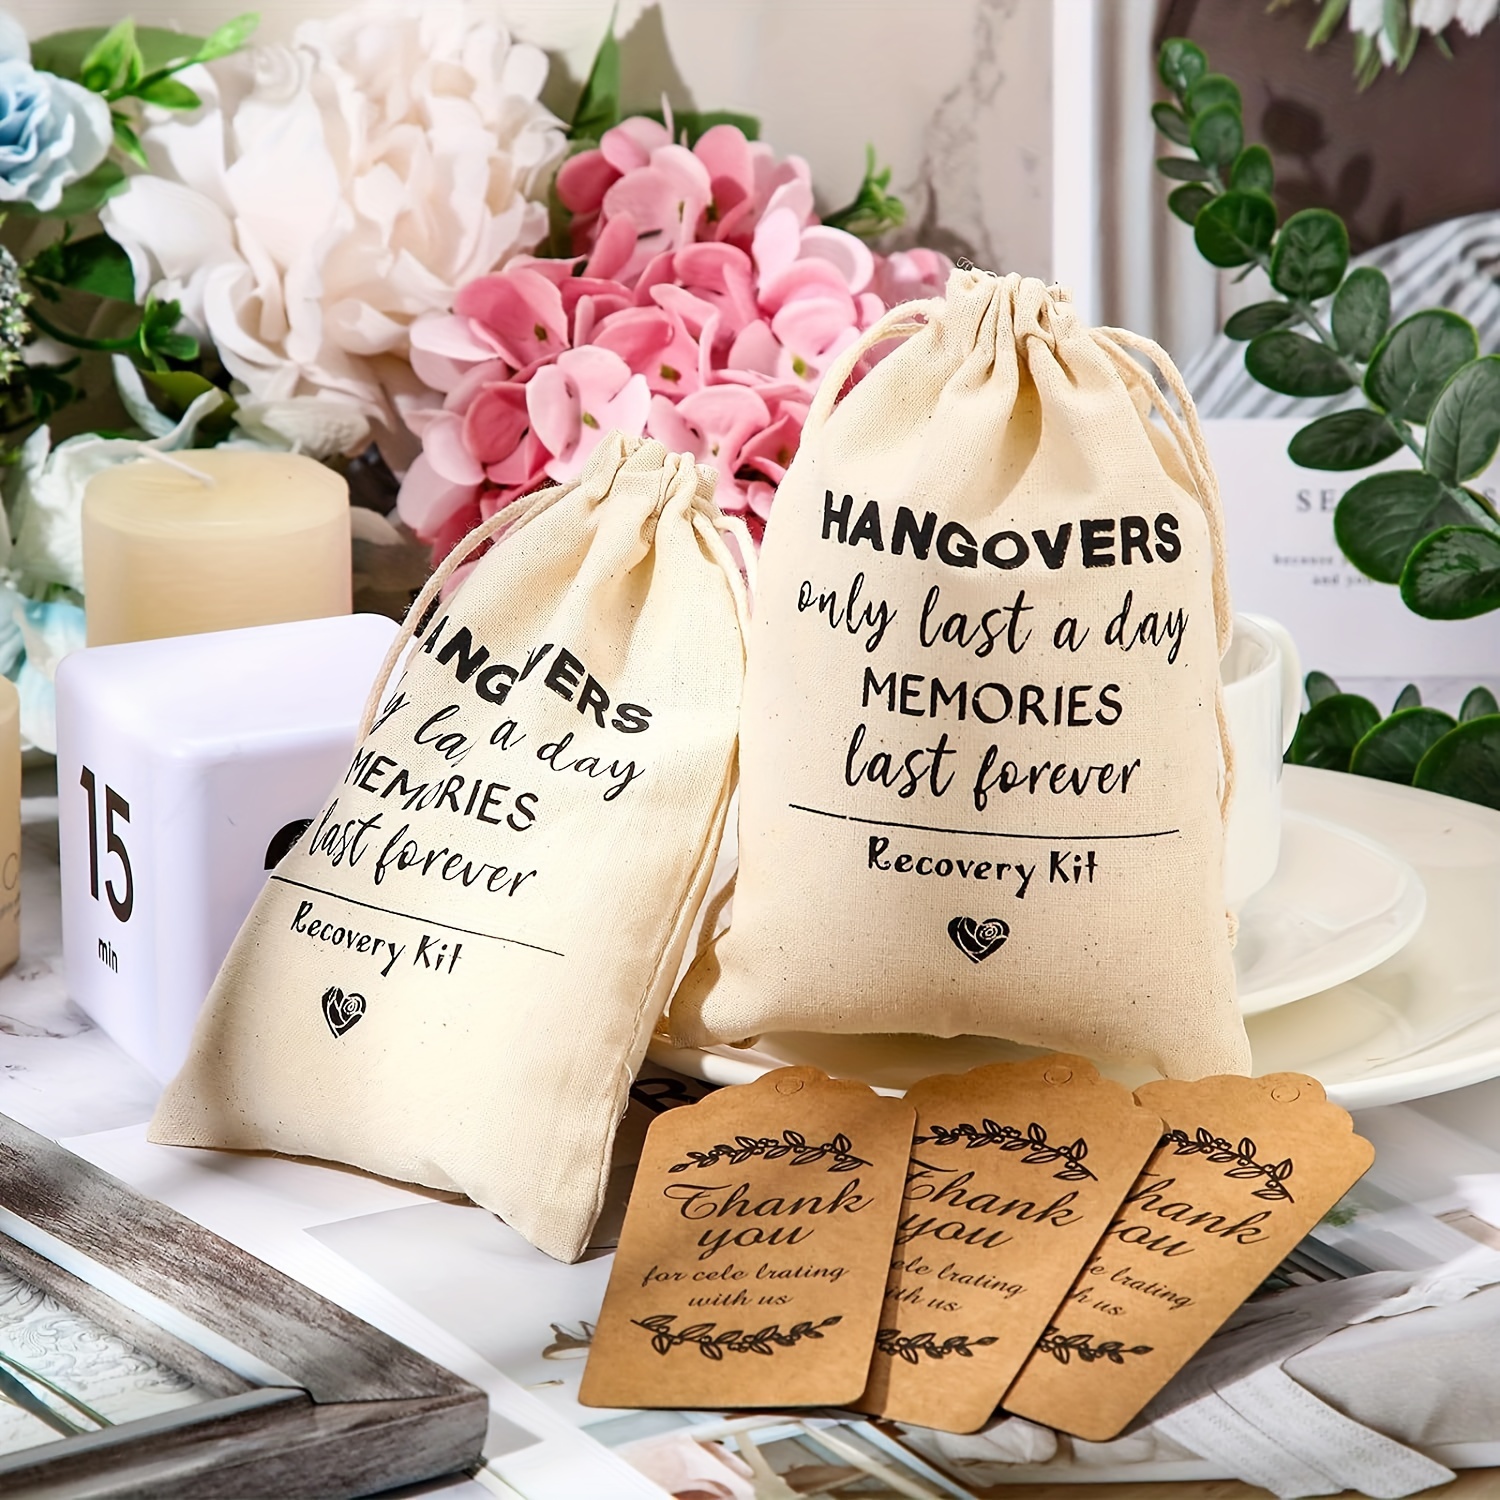 

Set, 30pcs Bags 30pcs Kraft Cards Cotton Party Favor Wedding Bag 4 X 6 Inch Hangover Bachelorette Bags Drawstring Survival Recovery Kit Bag With Gift Tags For Wedding Bridal Bridesmaid Groomsman Gifts